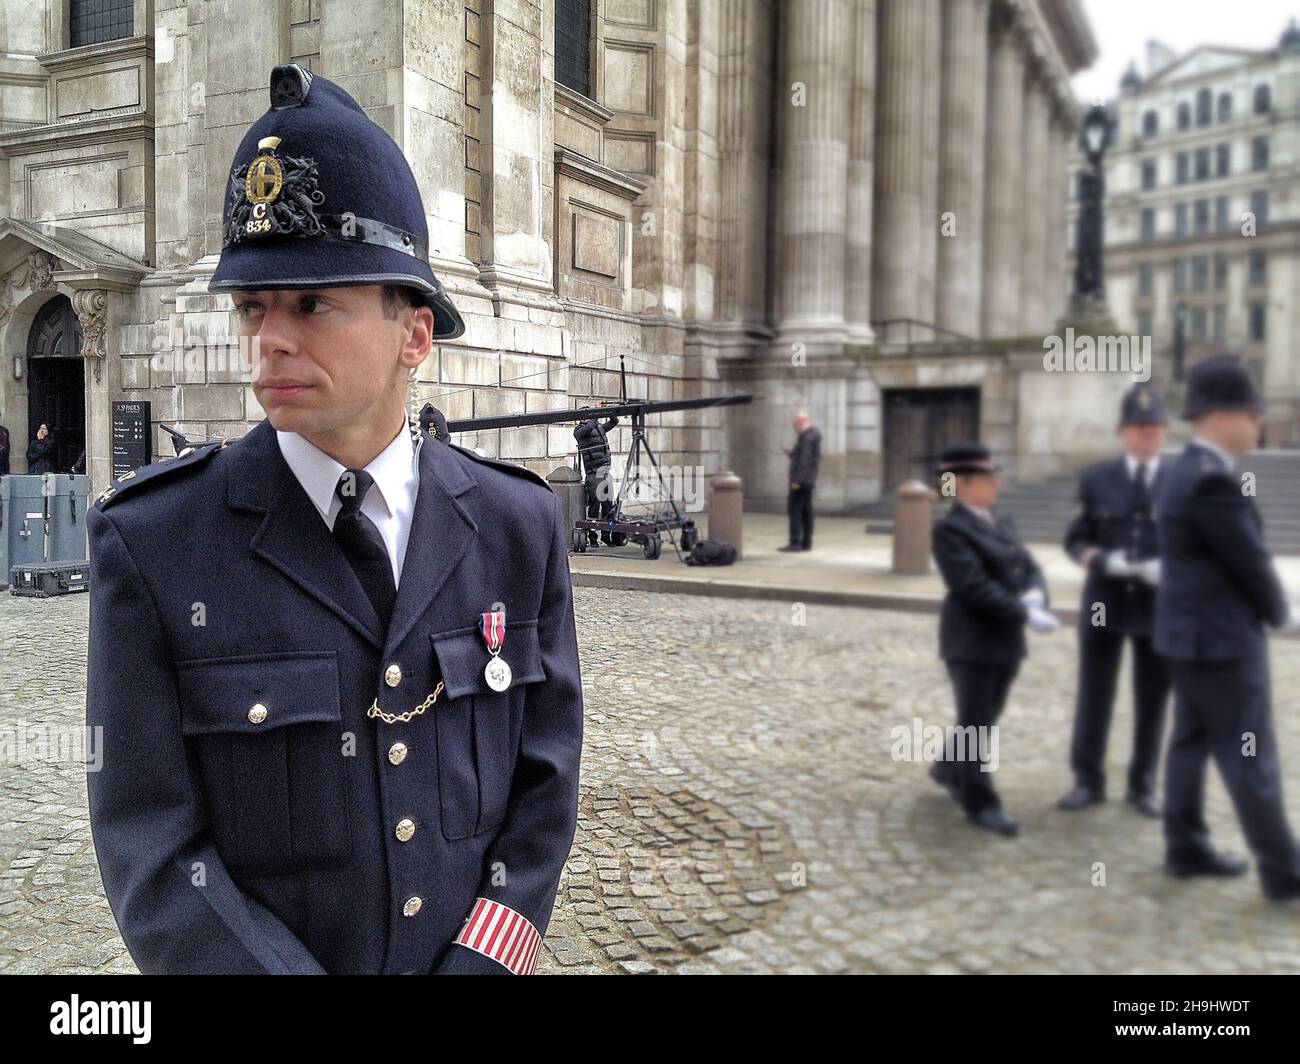 Police outside St Paul's Cathedral at Baroness Margaret Thatcher's Funeral. Picture taken and edited on the iPhone camera with Snapseed Stock Photo